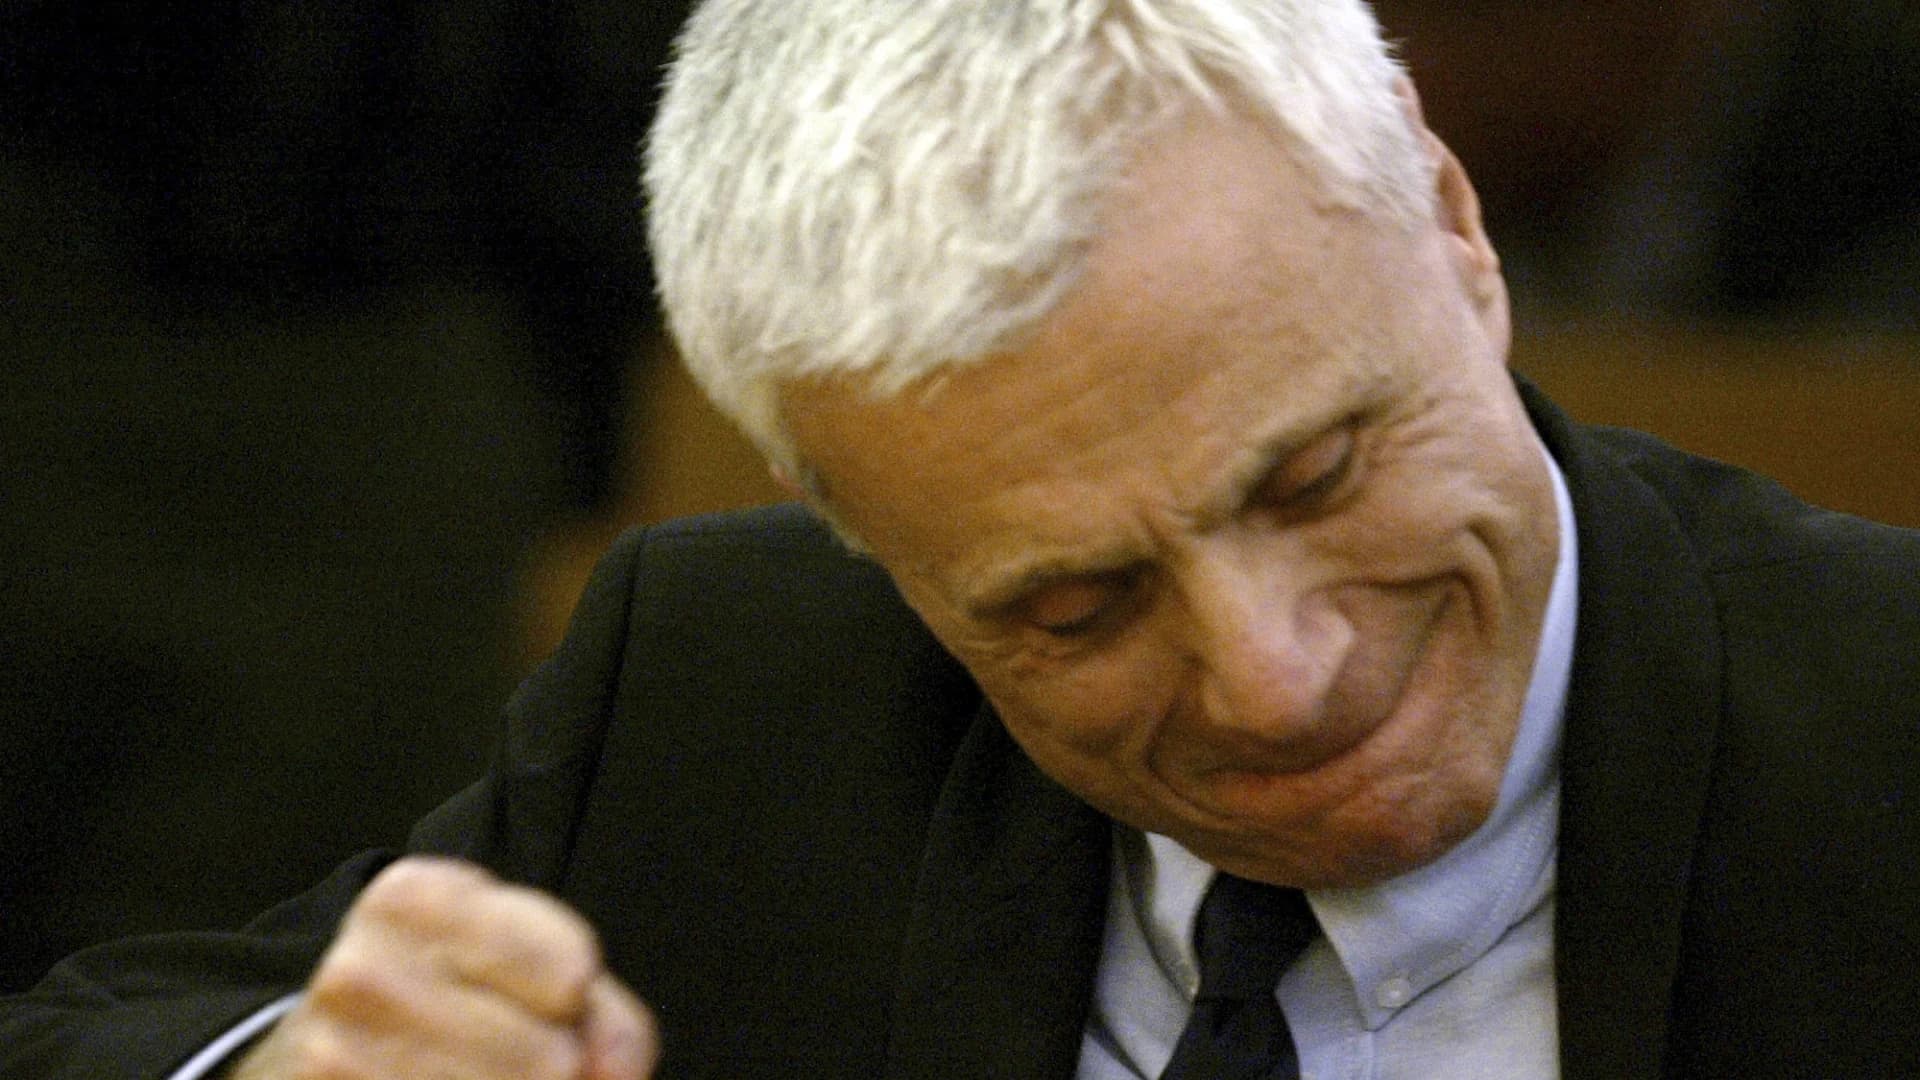 New Jersey native Robert Blake, actor acquitted in wife's killing, dies at 89